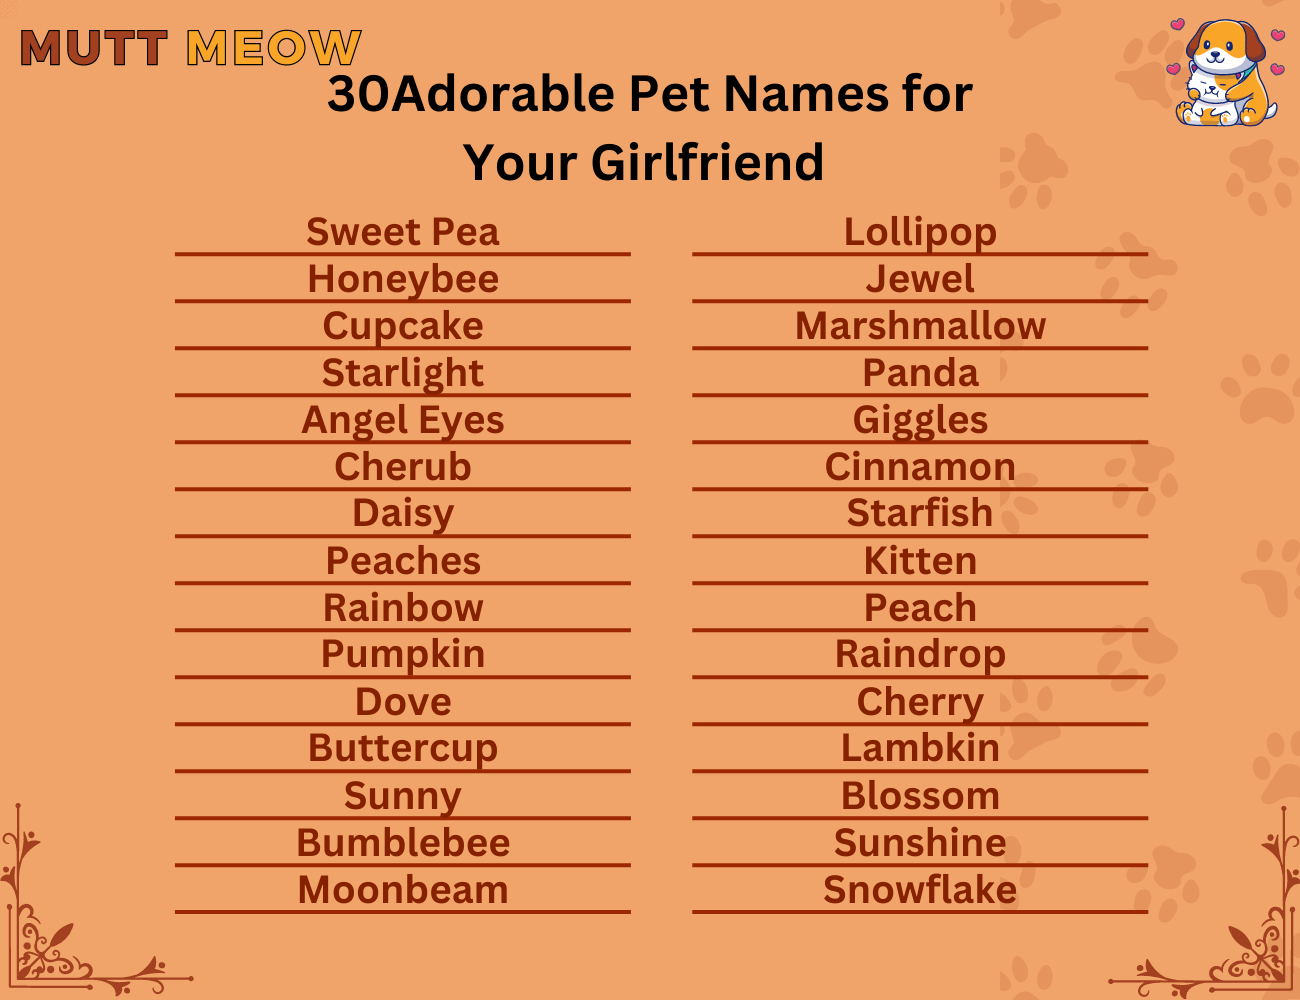 30 Adorable Pet Names for Your Girlfriend